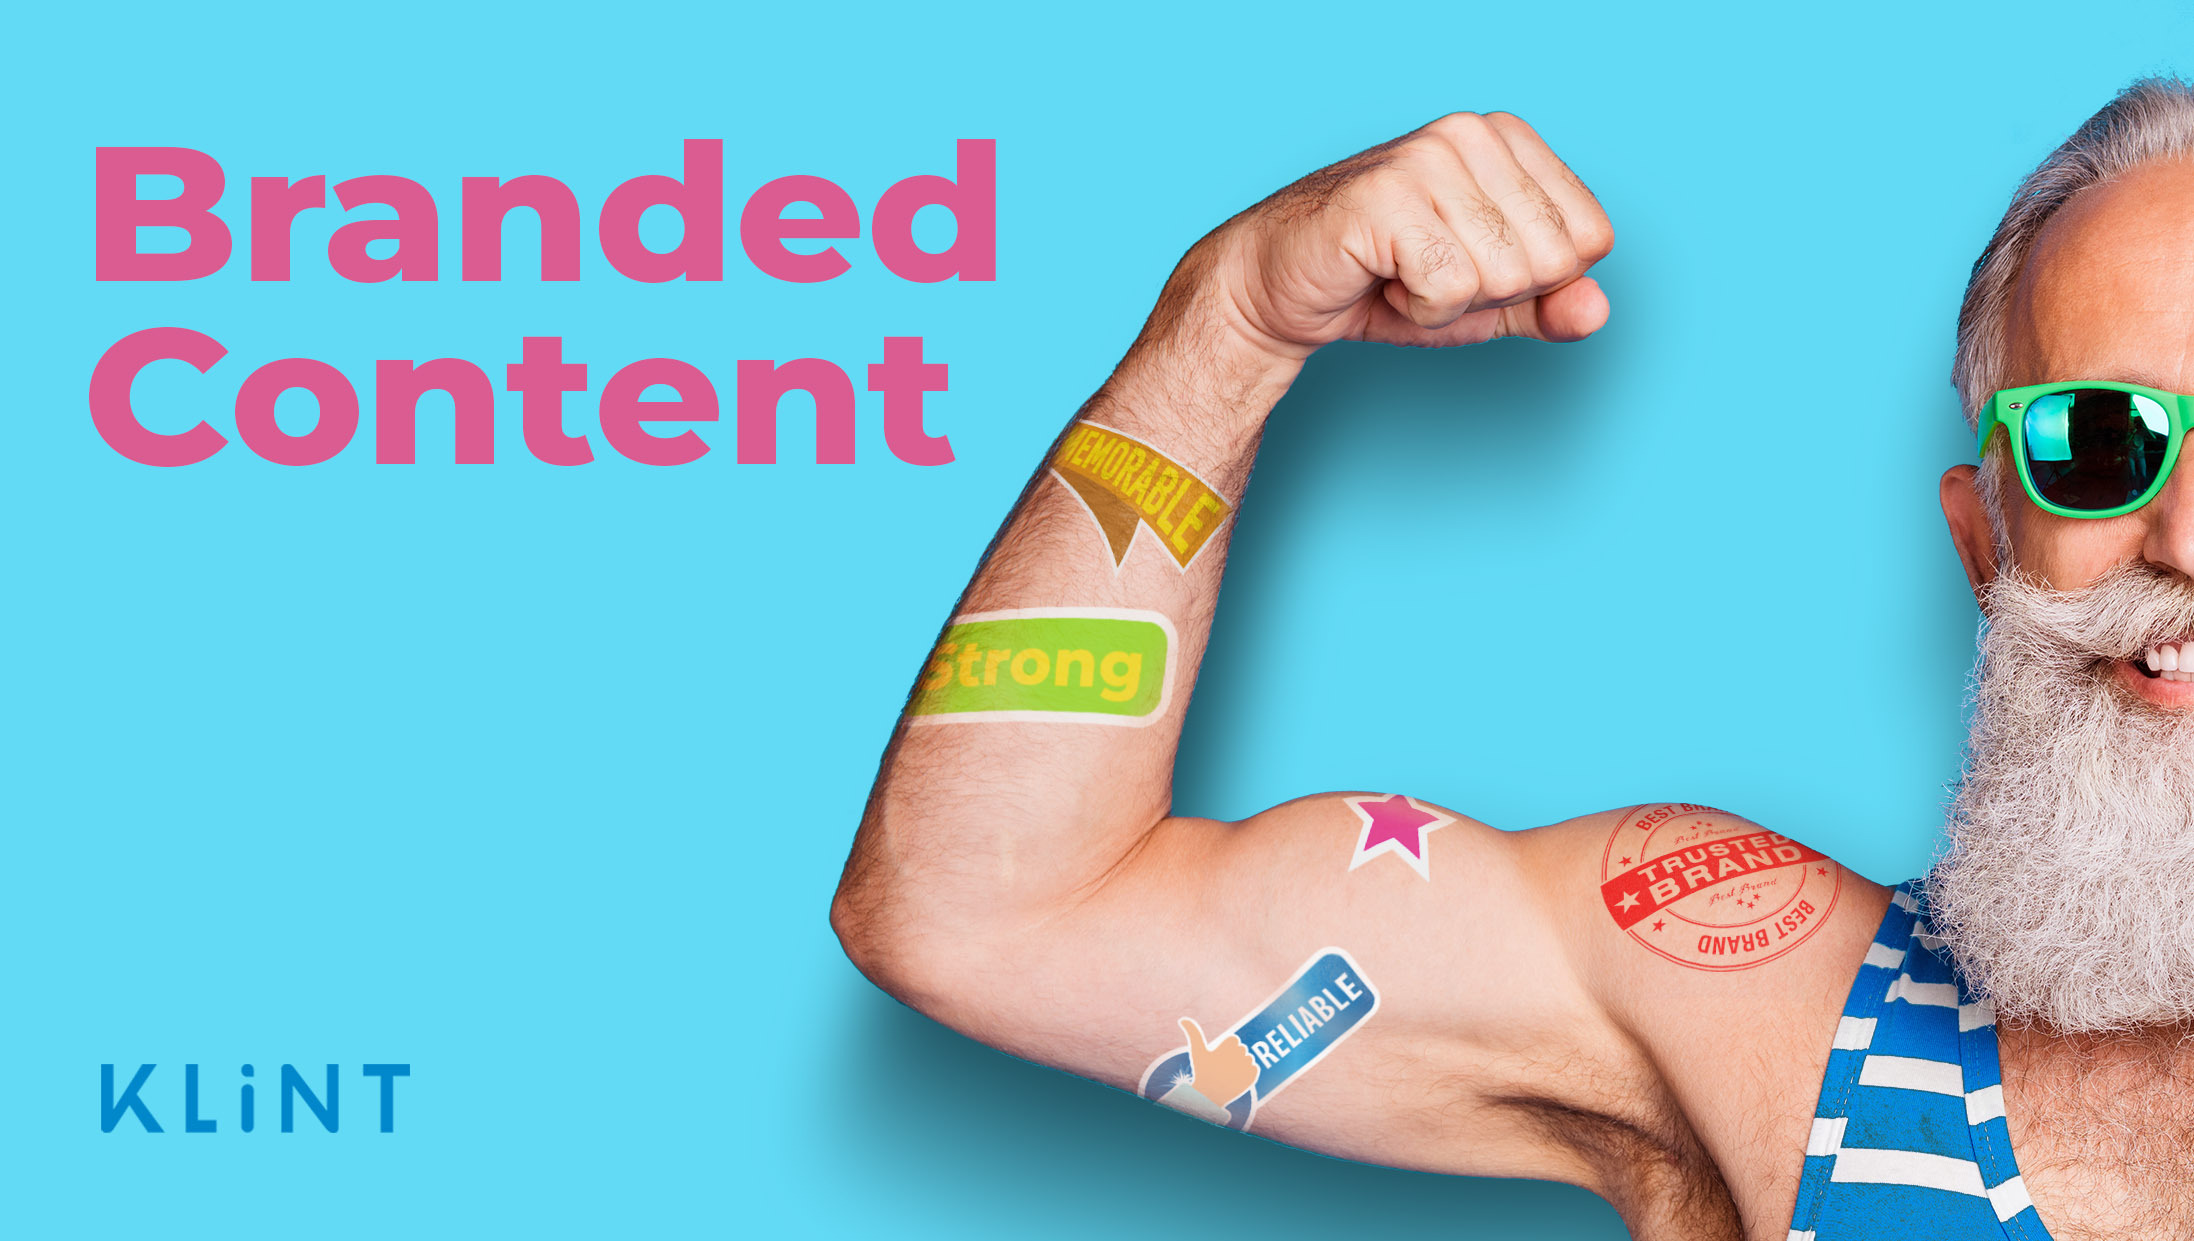 Branded Content: What Is It and How To Use It